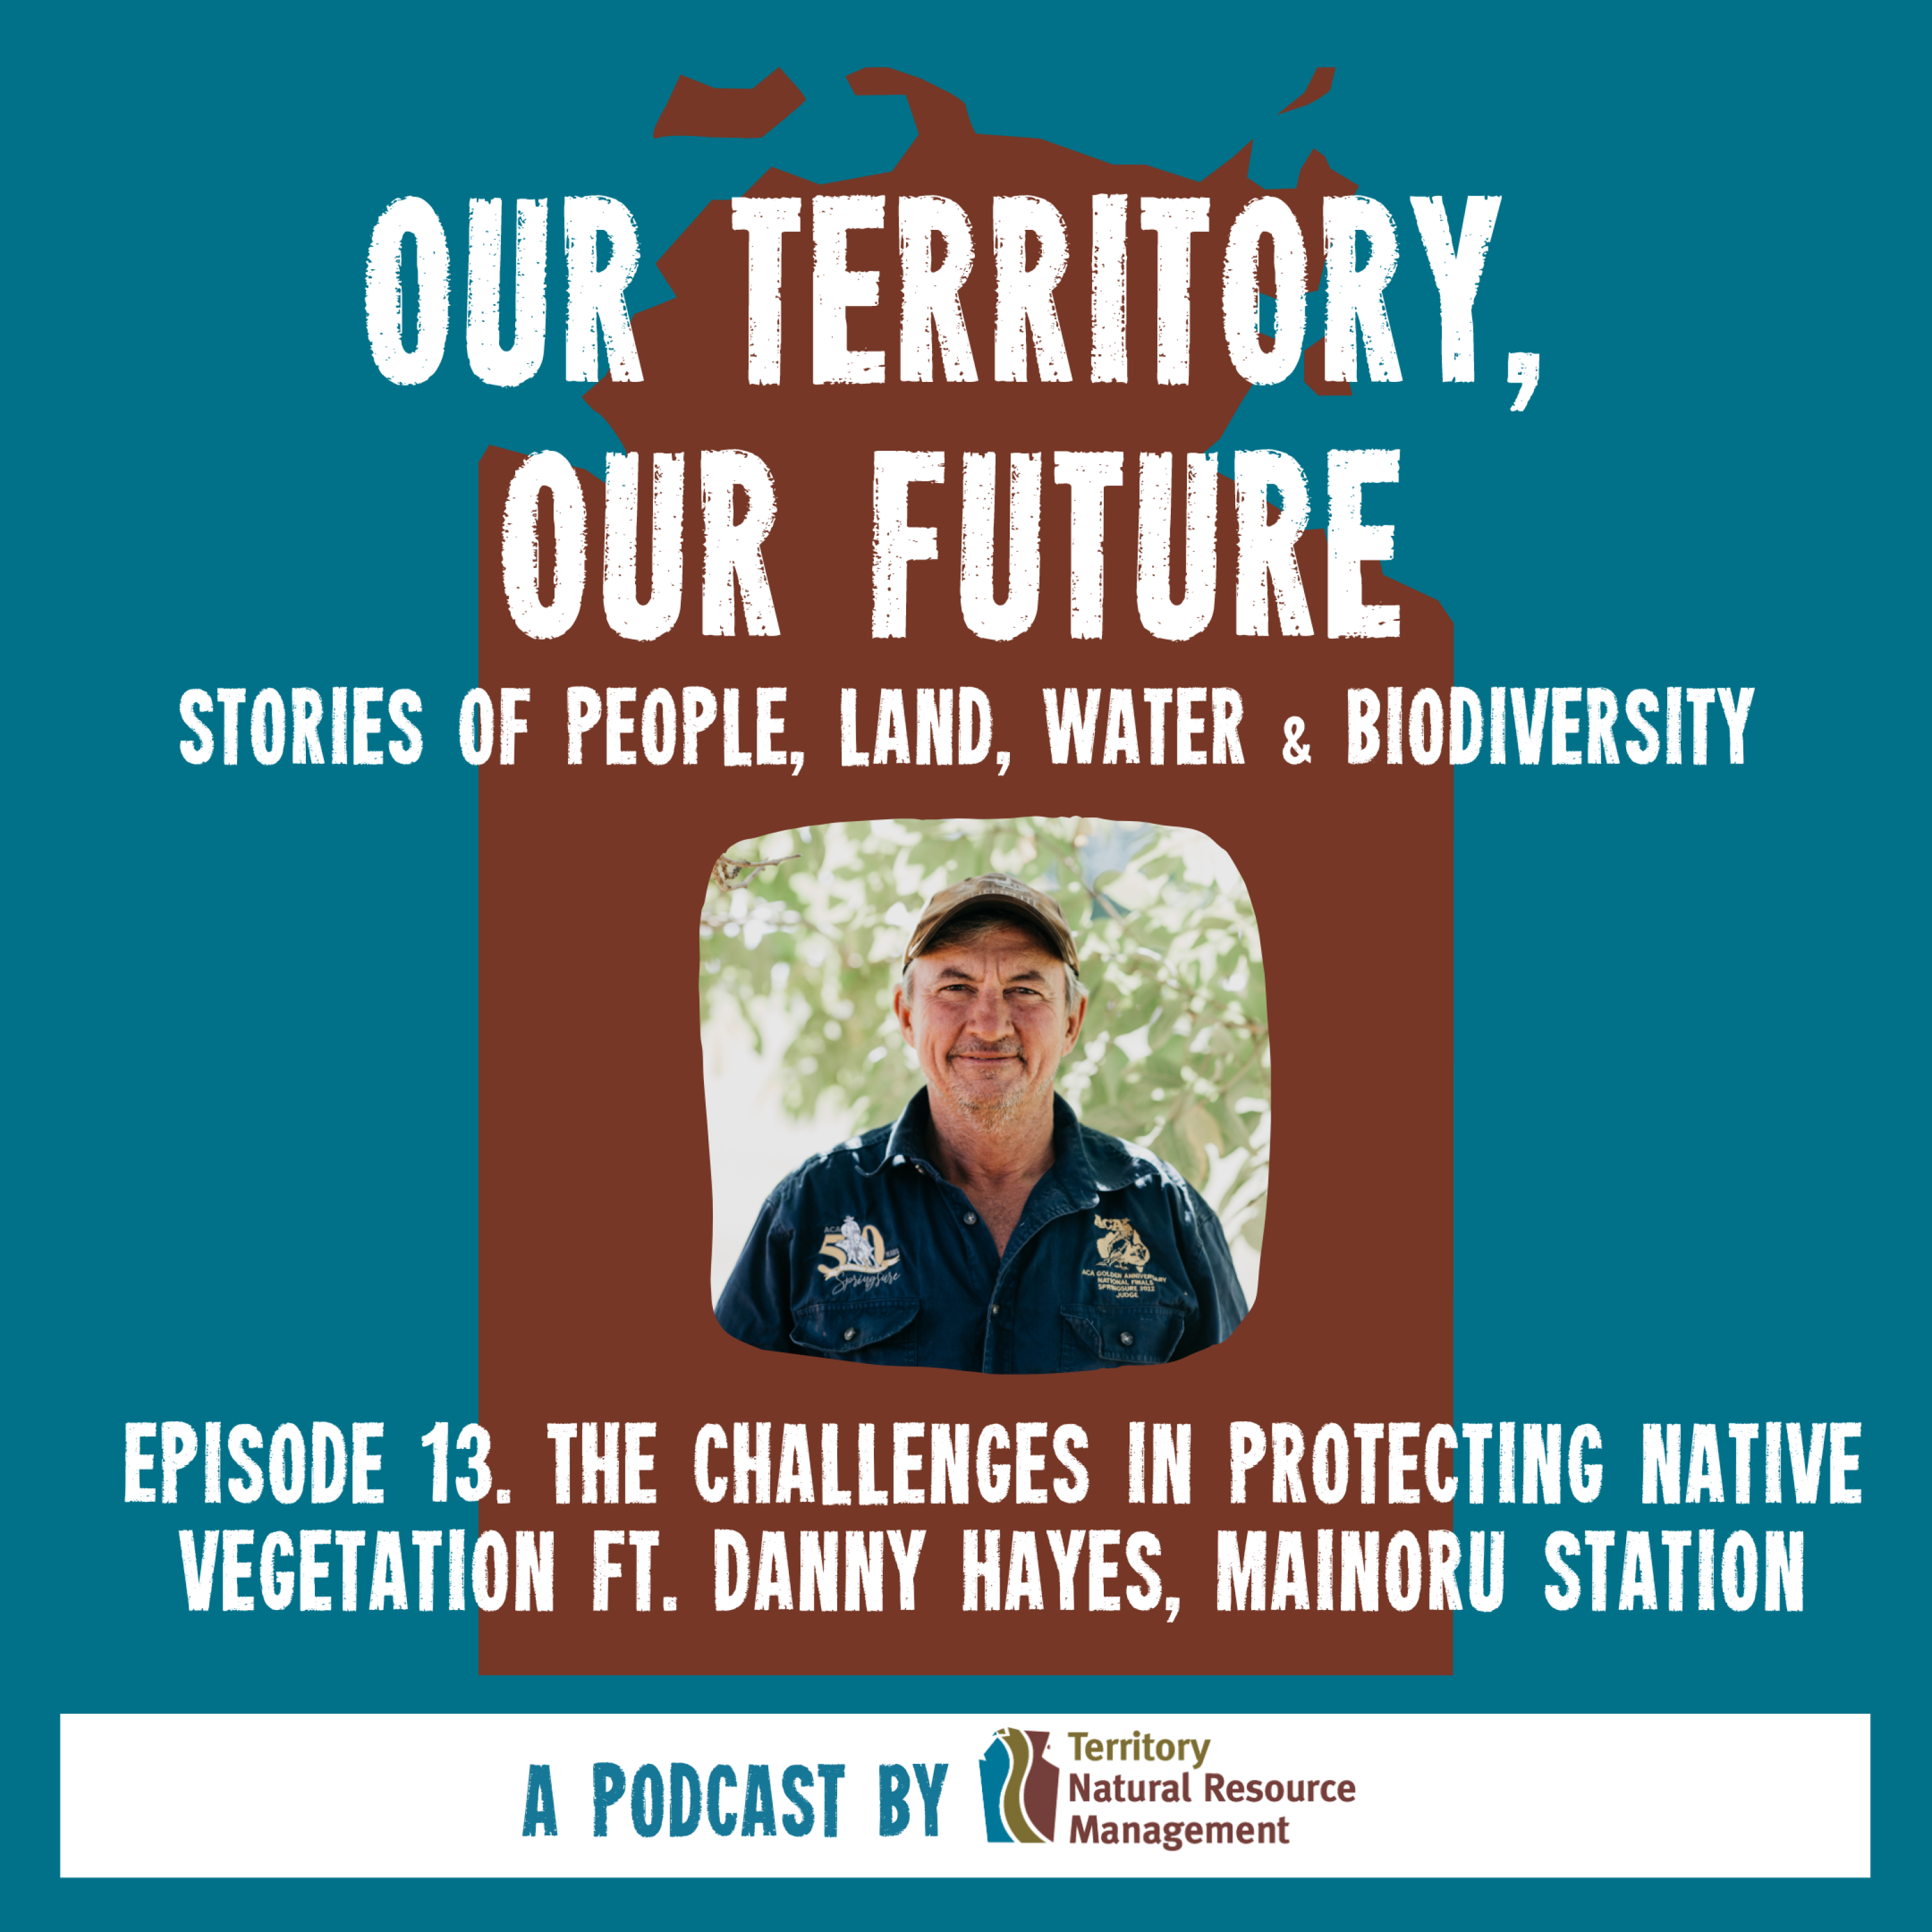 The challenges in protecting native vegetation ft. Danny Hayes, Mainoru Station